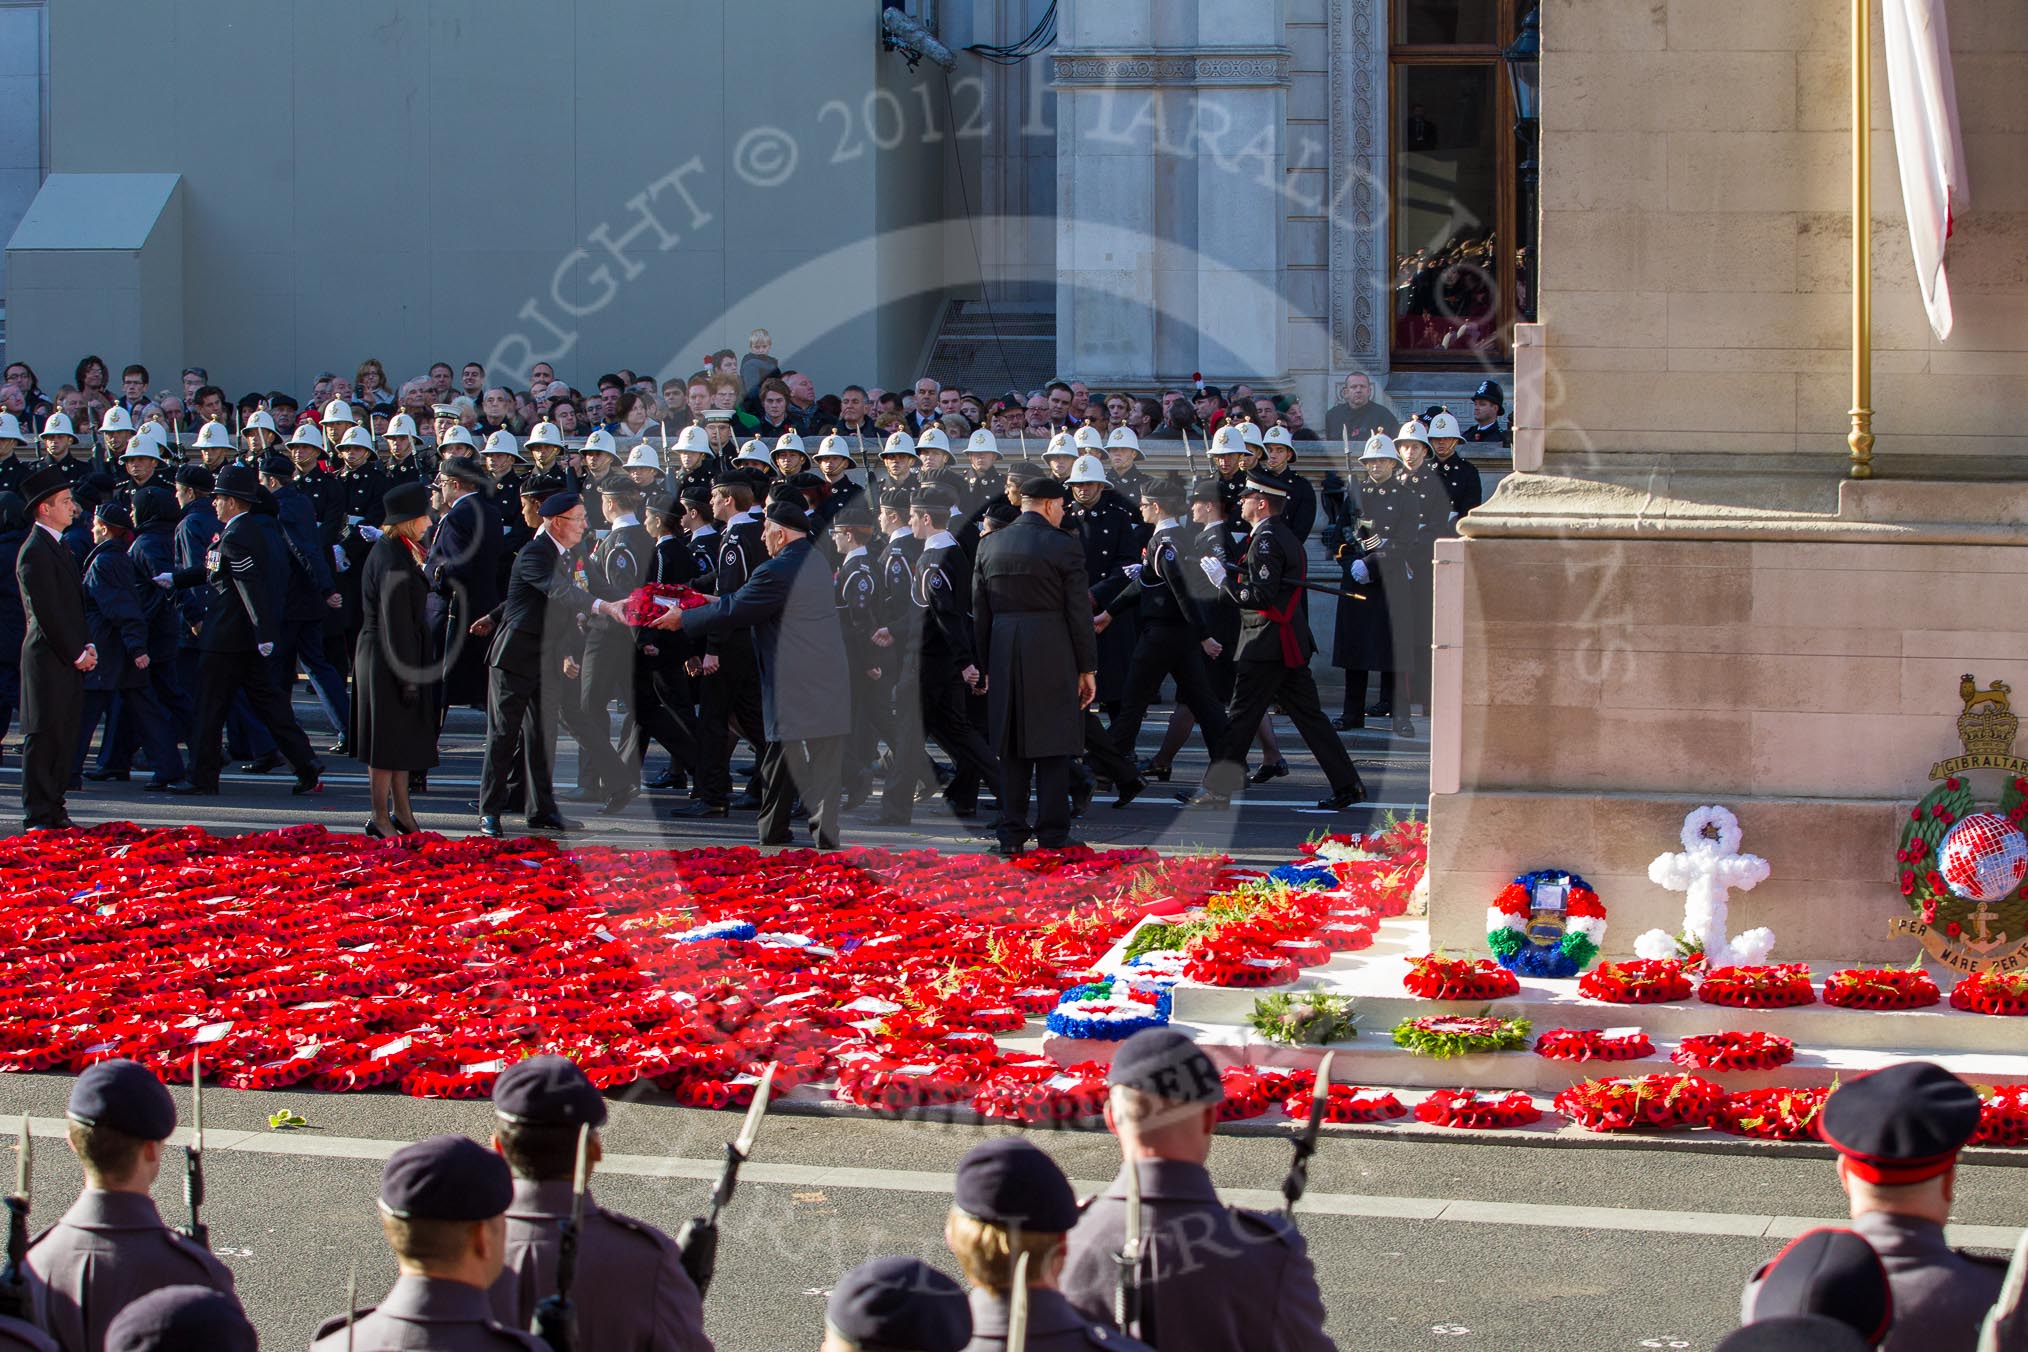 Remembrance Sunday 2012 Cenotaph March Past: The western side of the Cenotaph after the March Past, with the bright red of the hundreds wreaths laid during the March Past..
Whitehall, Cenotaph,
London SW1,

United Kingdom,
on 11 November 2012 at 12:16, image #1772